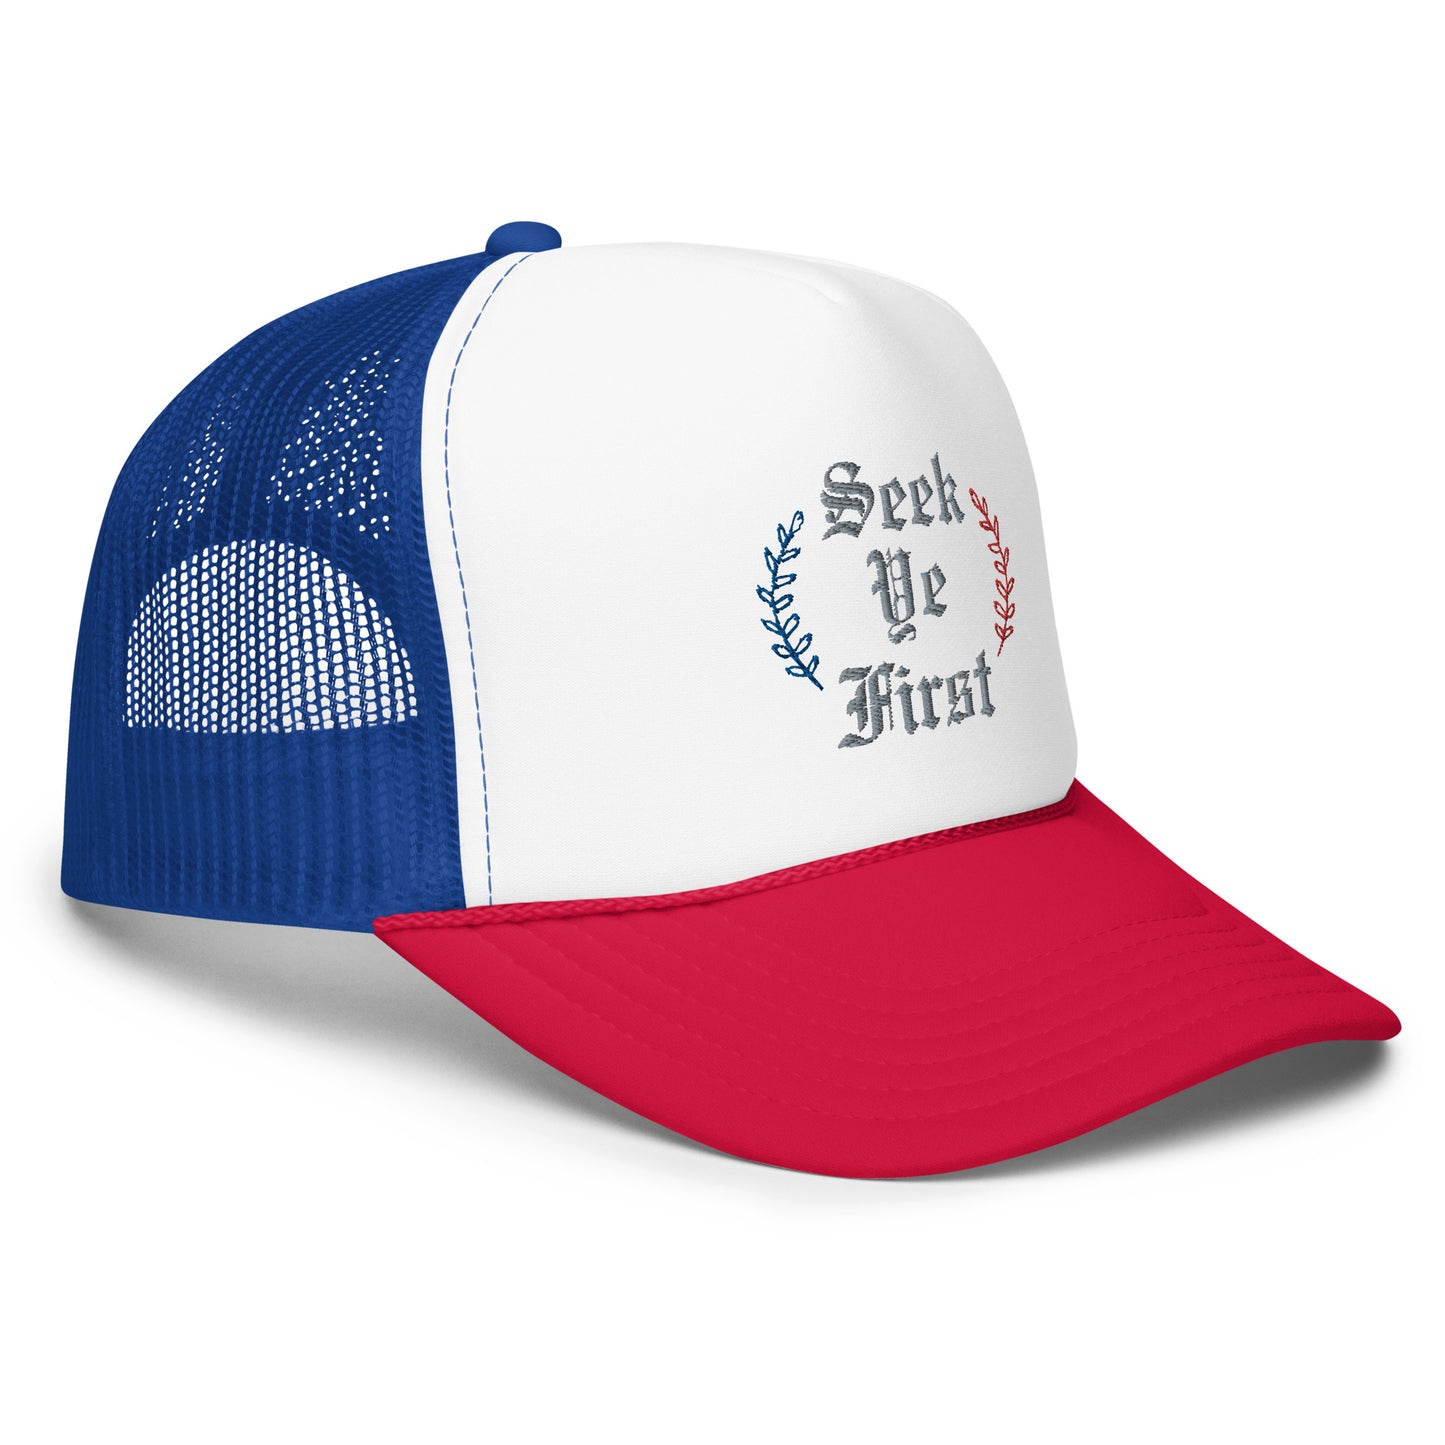 Old English Trucker Hat - Red, White, and Blue